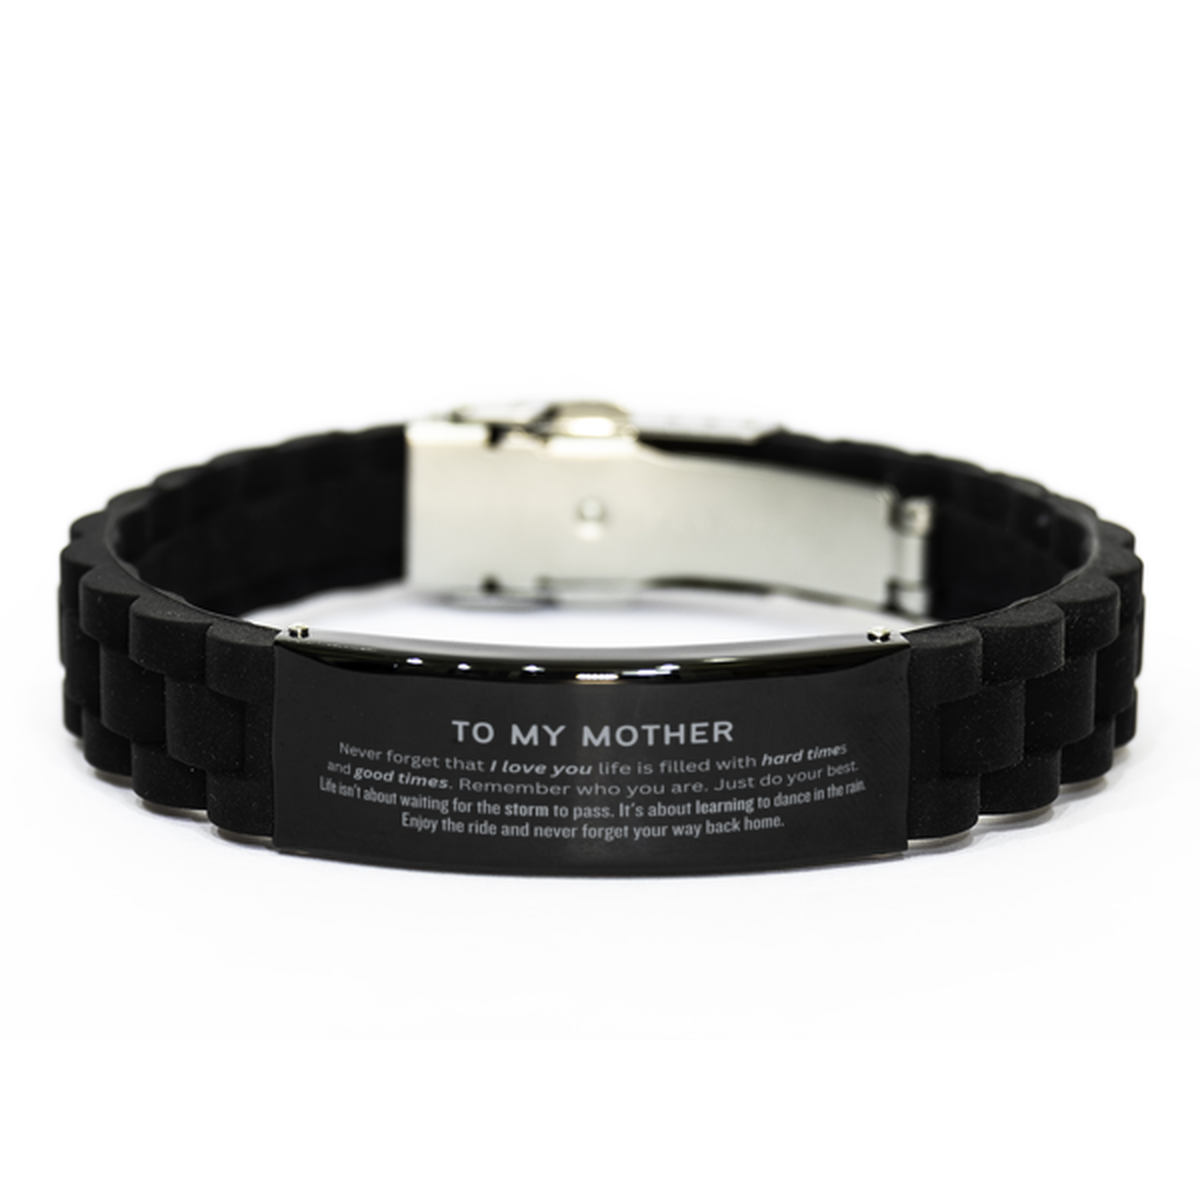 Christmas Mother Black Glidelock Clasp Bracelet Gifts, To My Mother Birthday Thank You Gifts For Mother, Graduation Unique Gifts For Mother To My Mother Never forget that I love you life is filled with hard times and good times. Remember who you are. Just